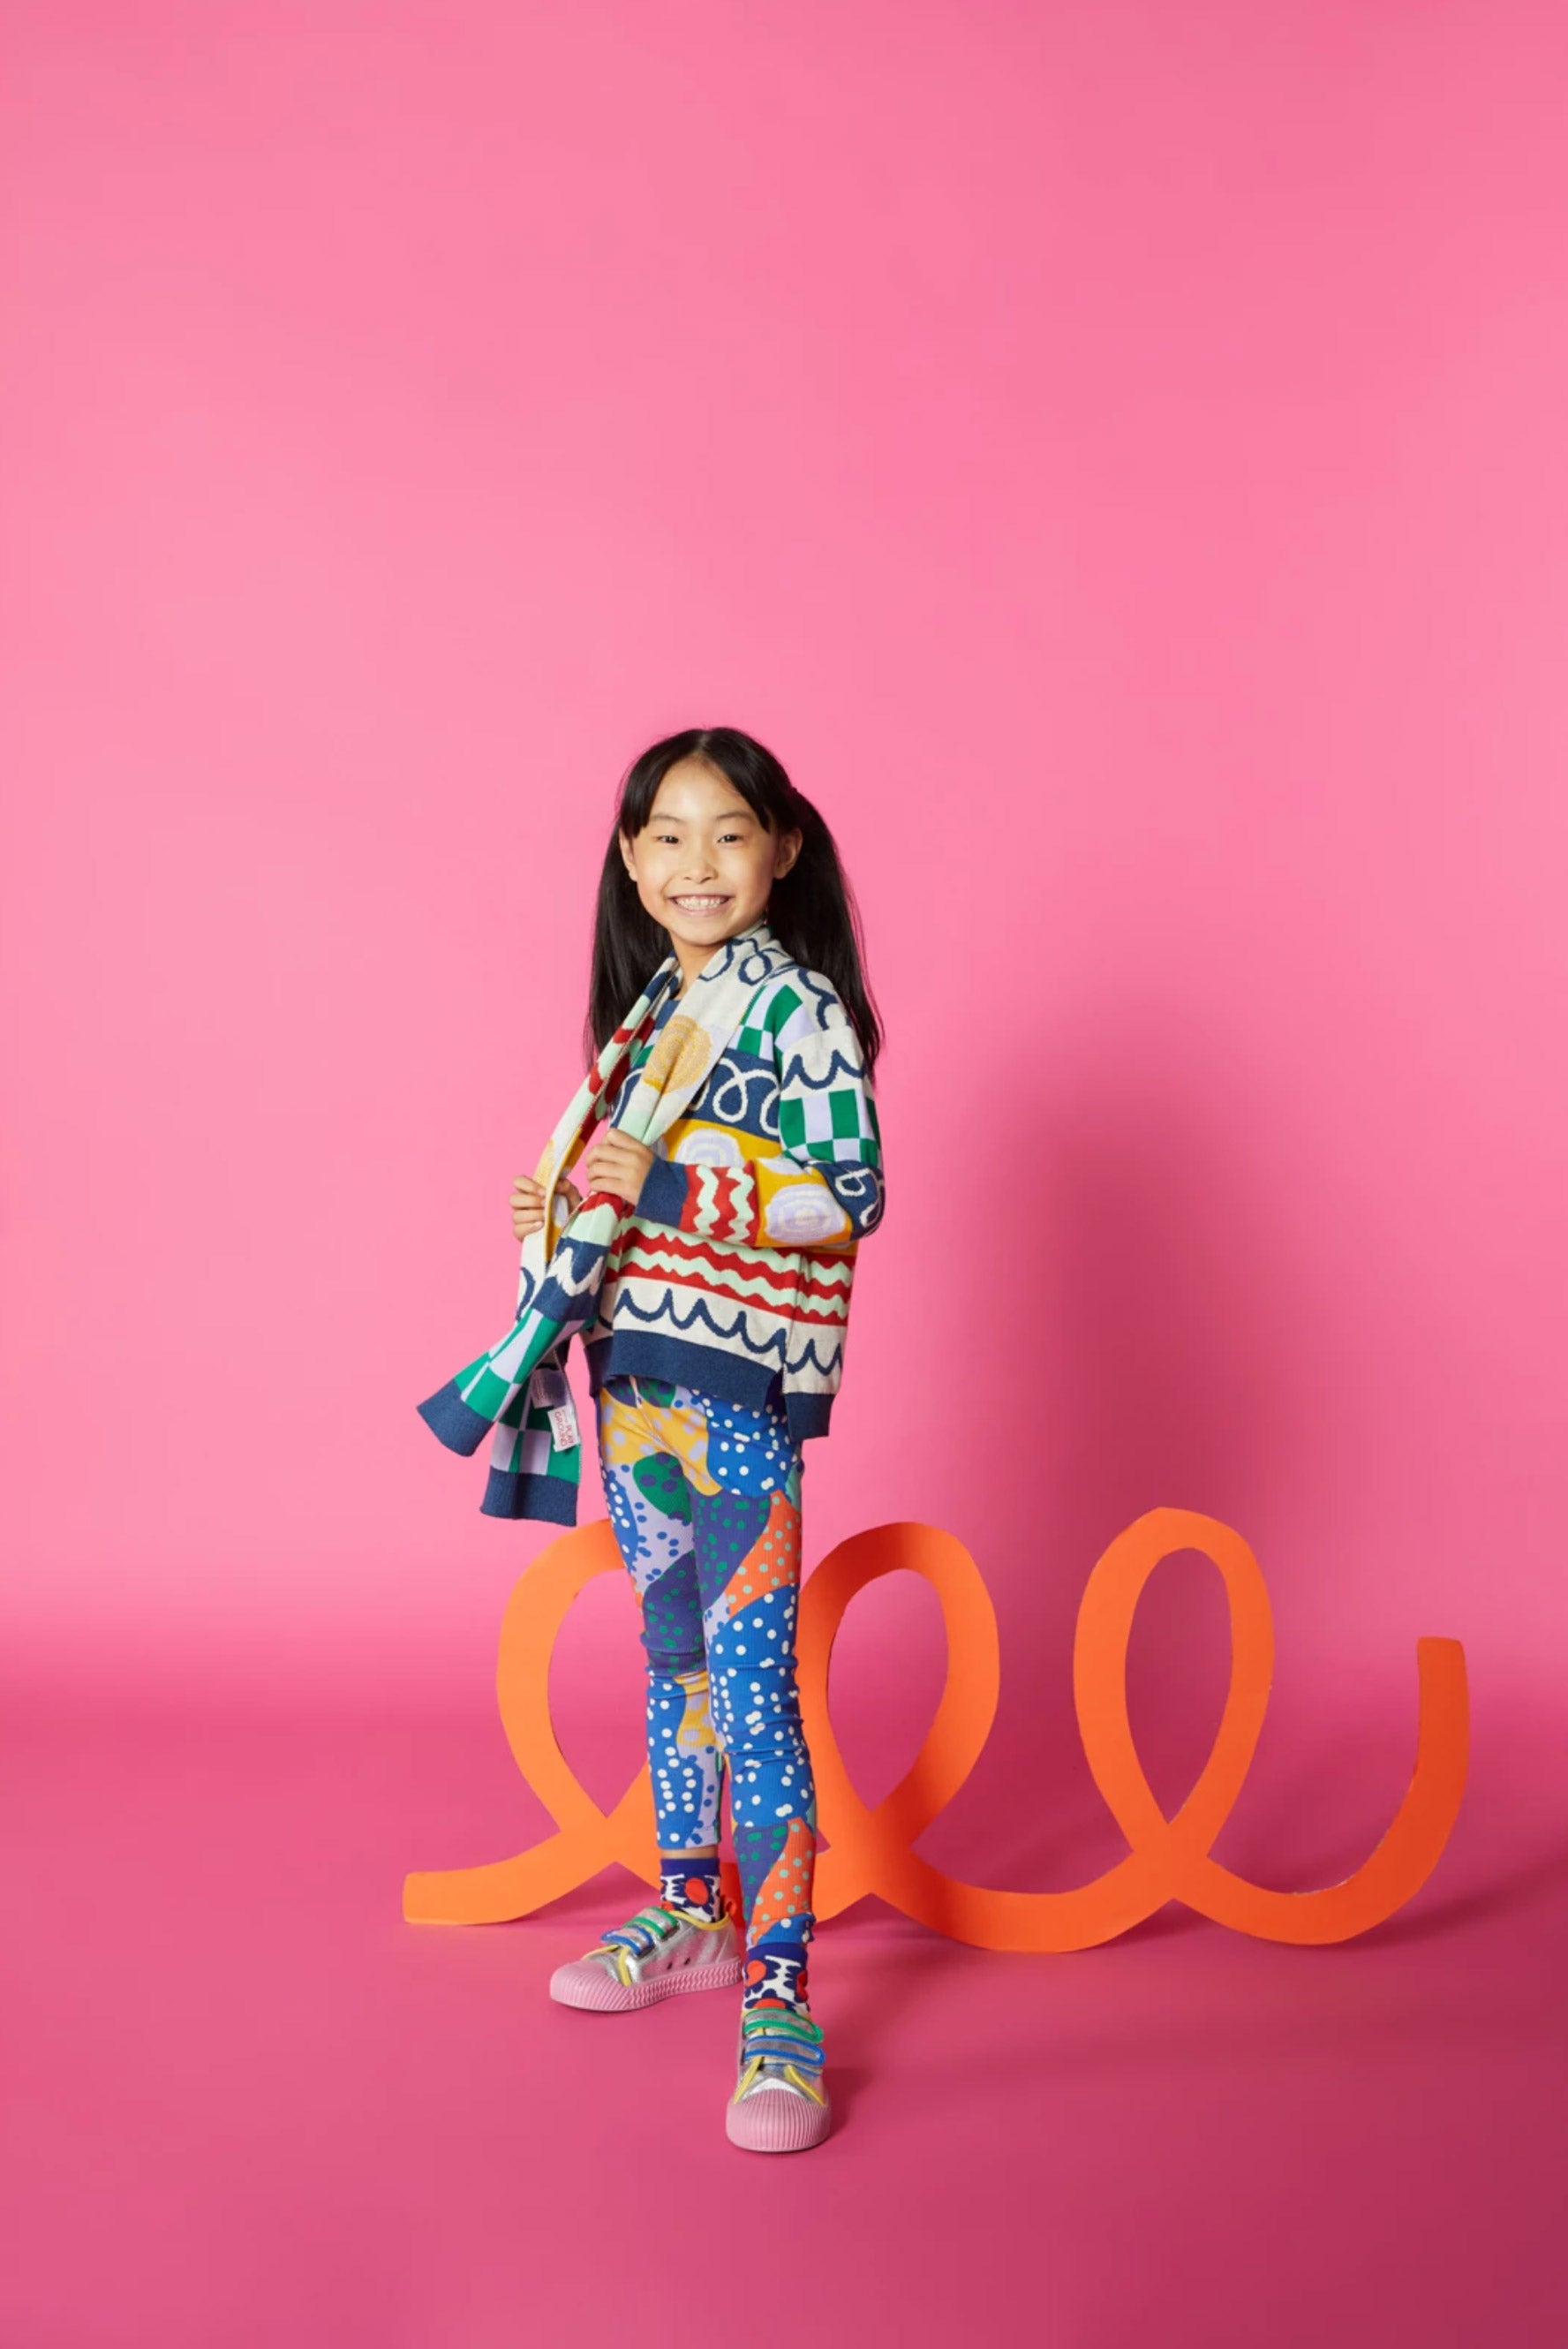 A girl in a colourful outfit stands against a dark pink background with an orange loopy cardboard cutoutprop.